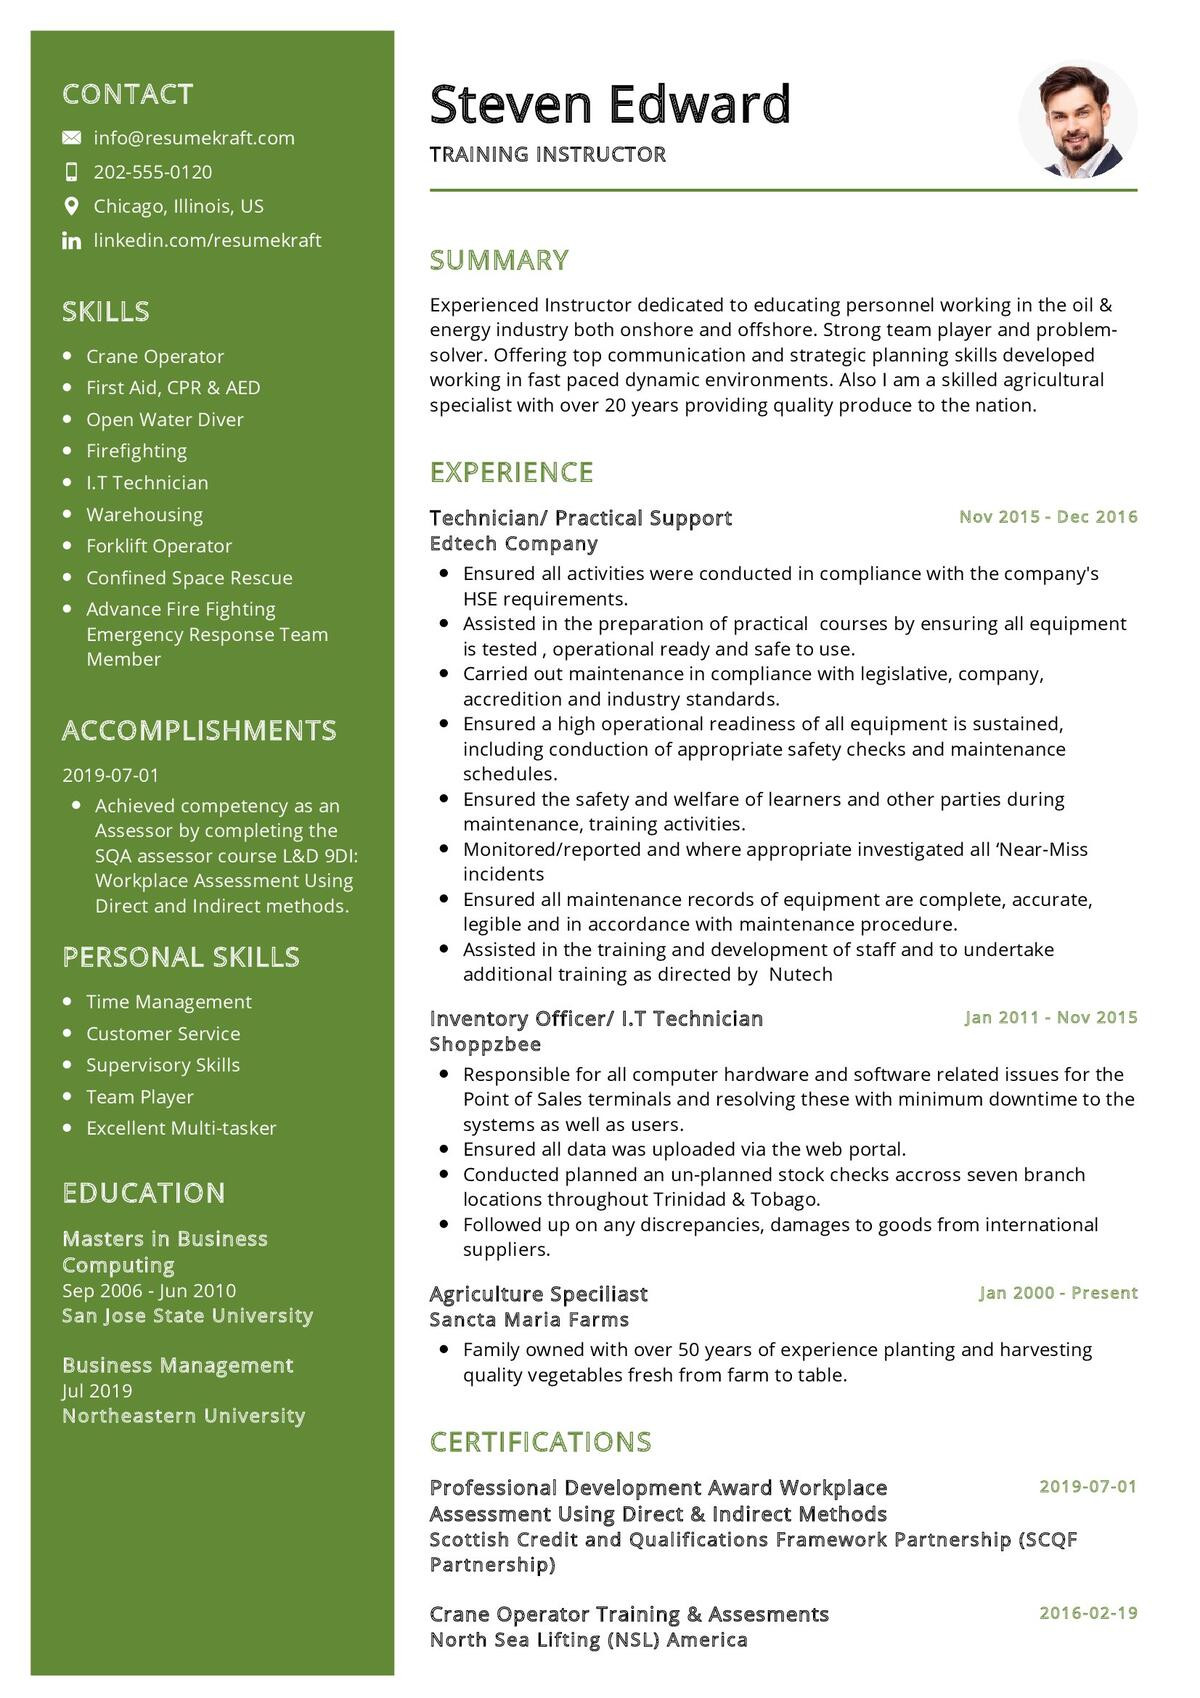 Training Manager and Development Manager Resume Sample Training Instructor Resume Sample 2021 Writing Guide – Resumekraft